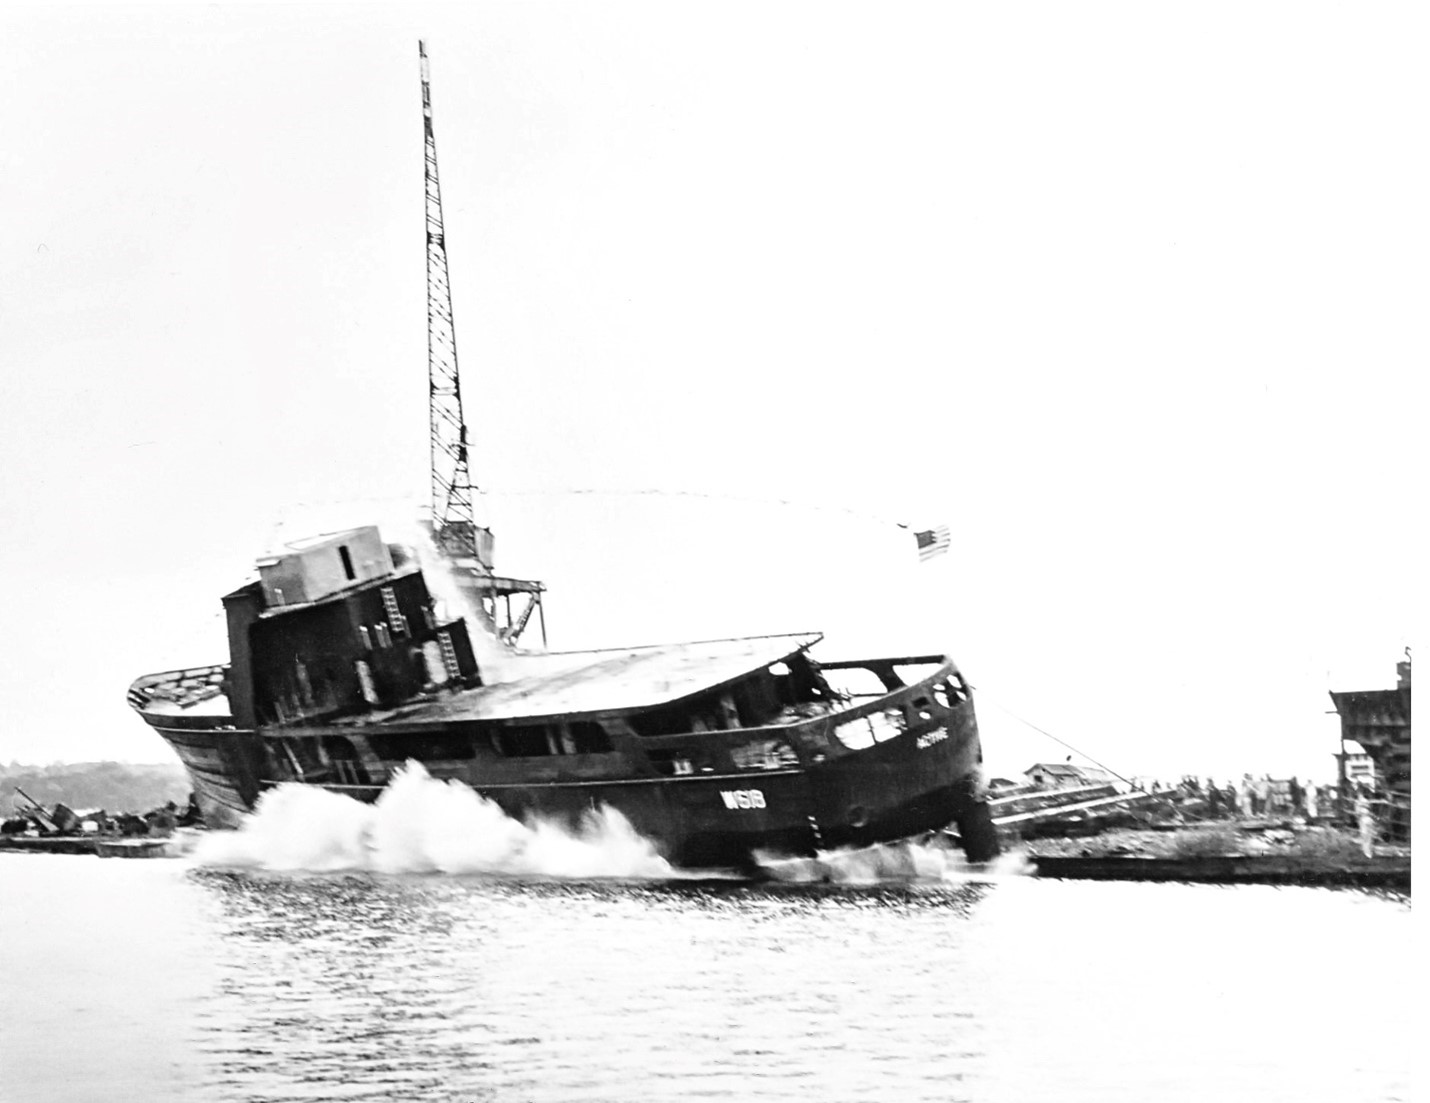 USCGC ACTIVE is launched in Sturgeon Bay, WI circa. 1965